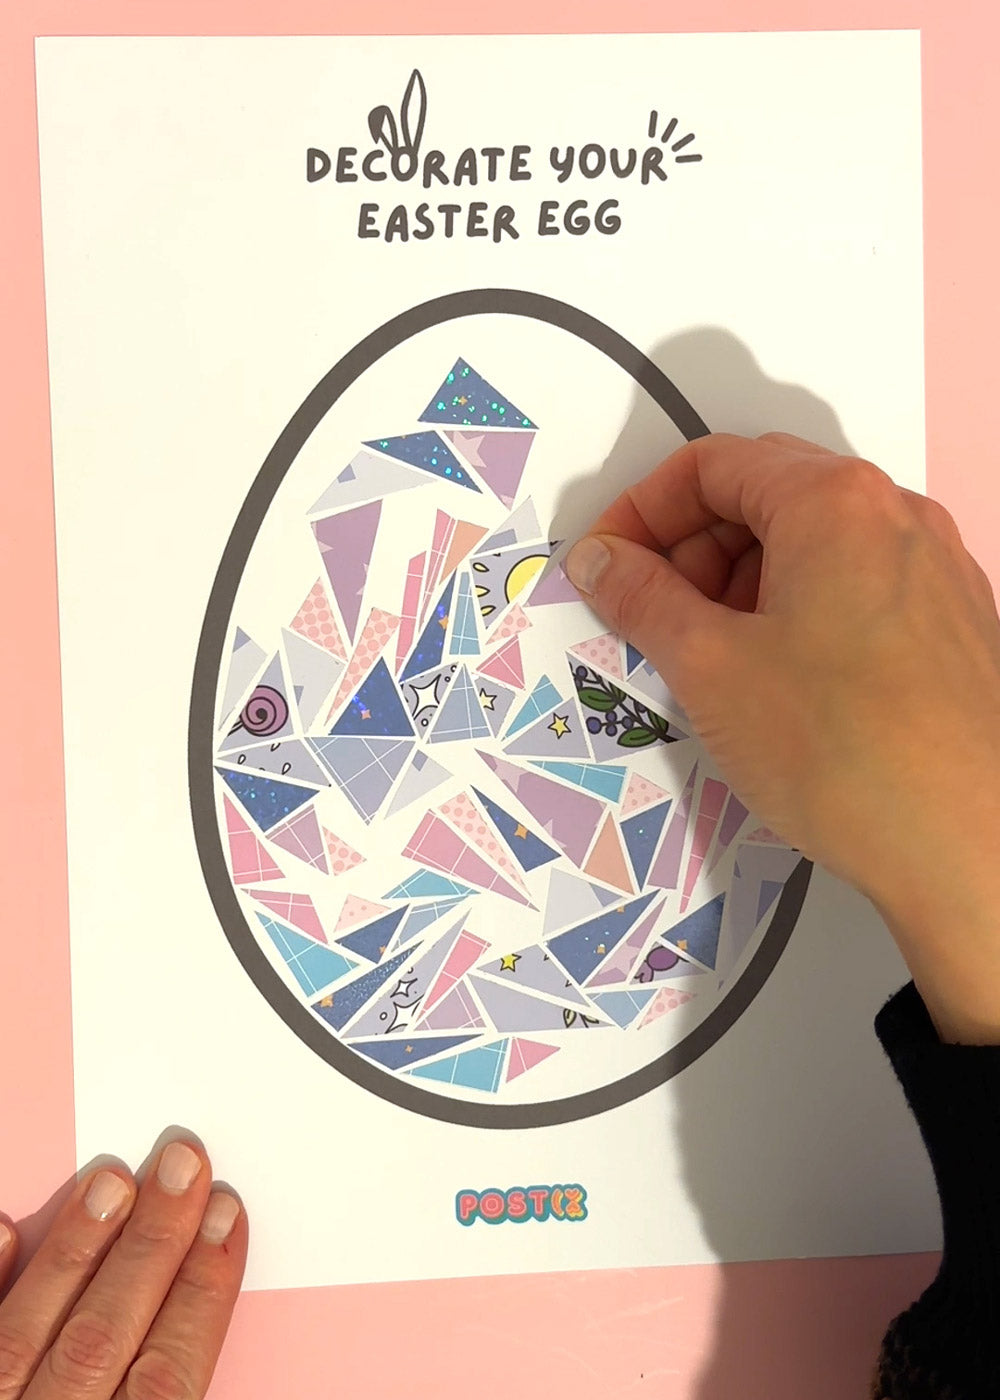 Decorate an Easter Egg with stickers